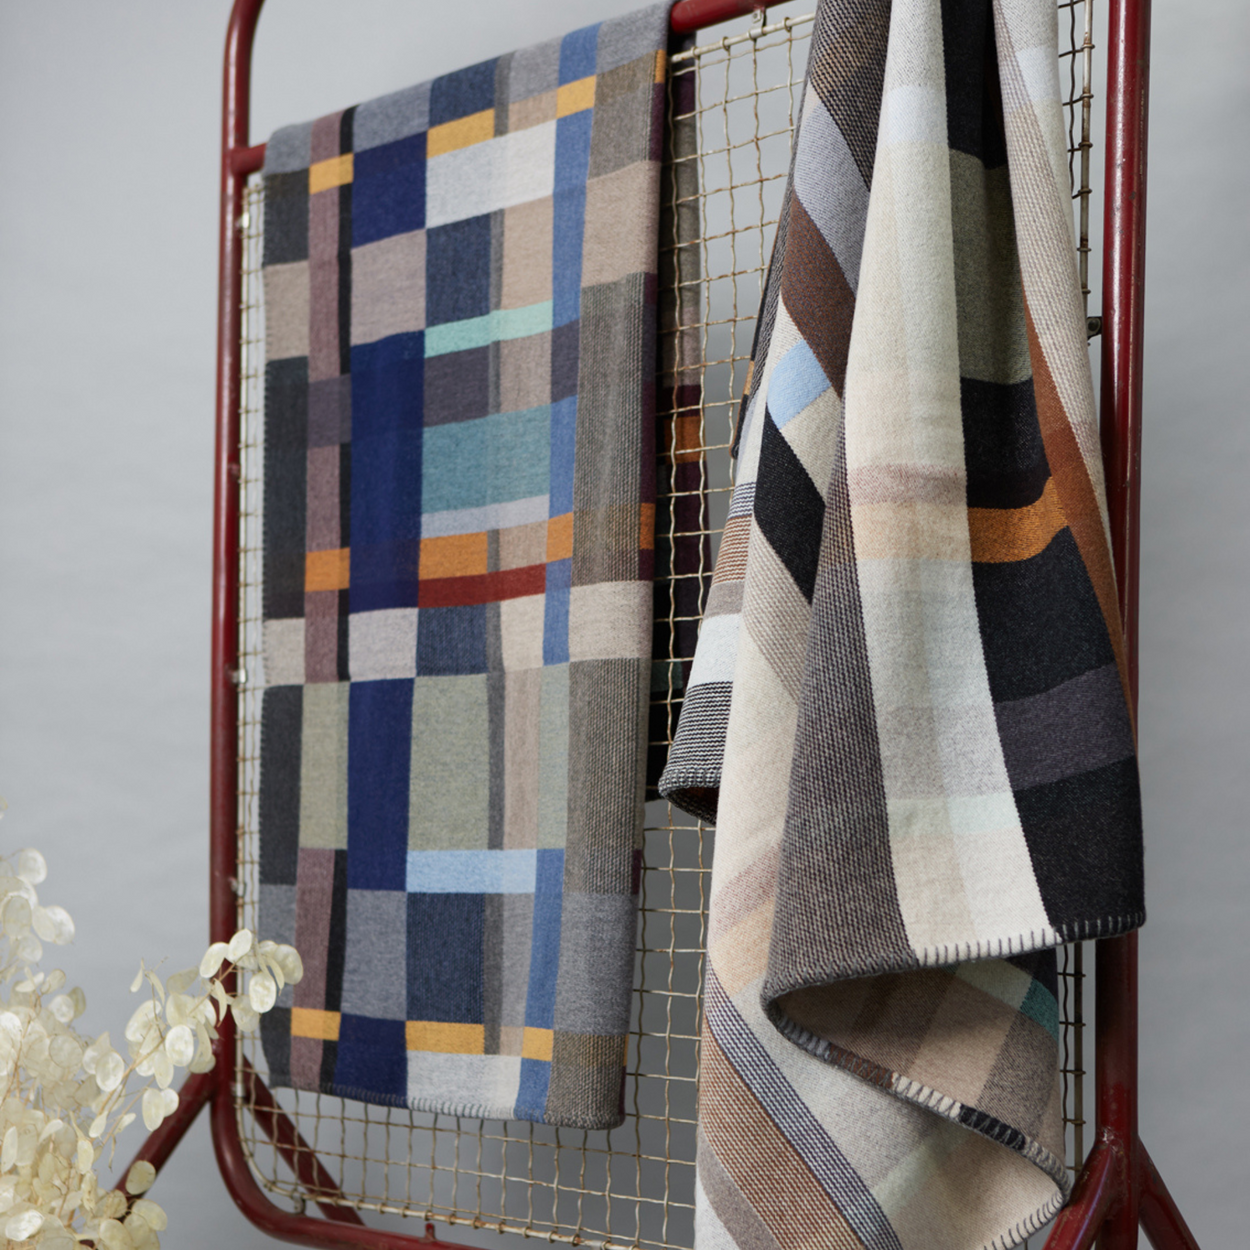 Wallace Sewell Premium Chipperfield  Merino lambswool throw in pale brown tones hanging on metal frame with Erno blanket